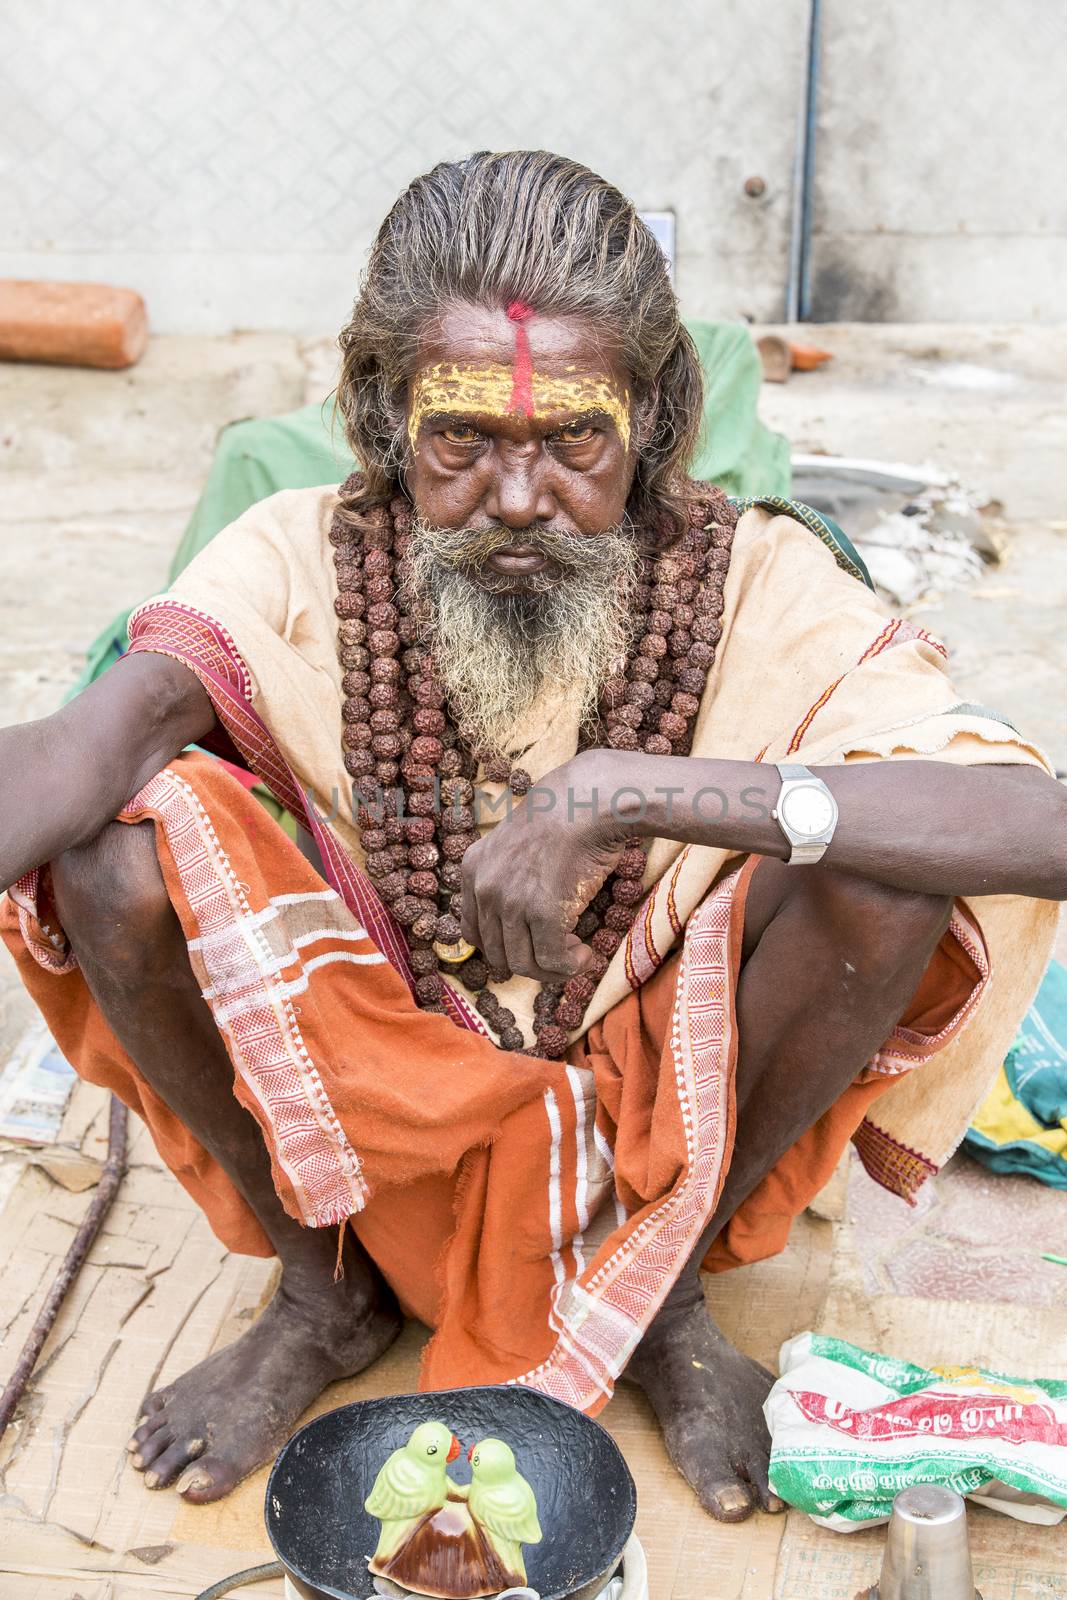 Documentary editorial image,Poverty in the street India by CatherineL-Prod